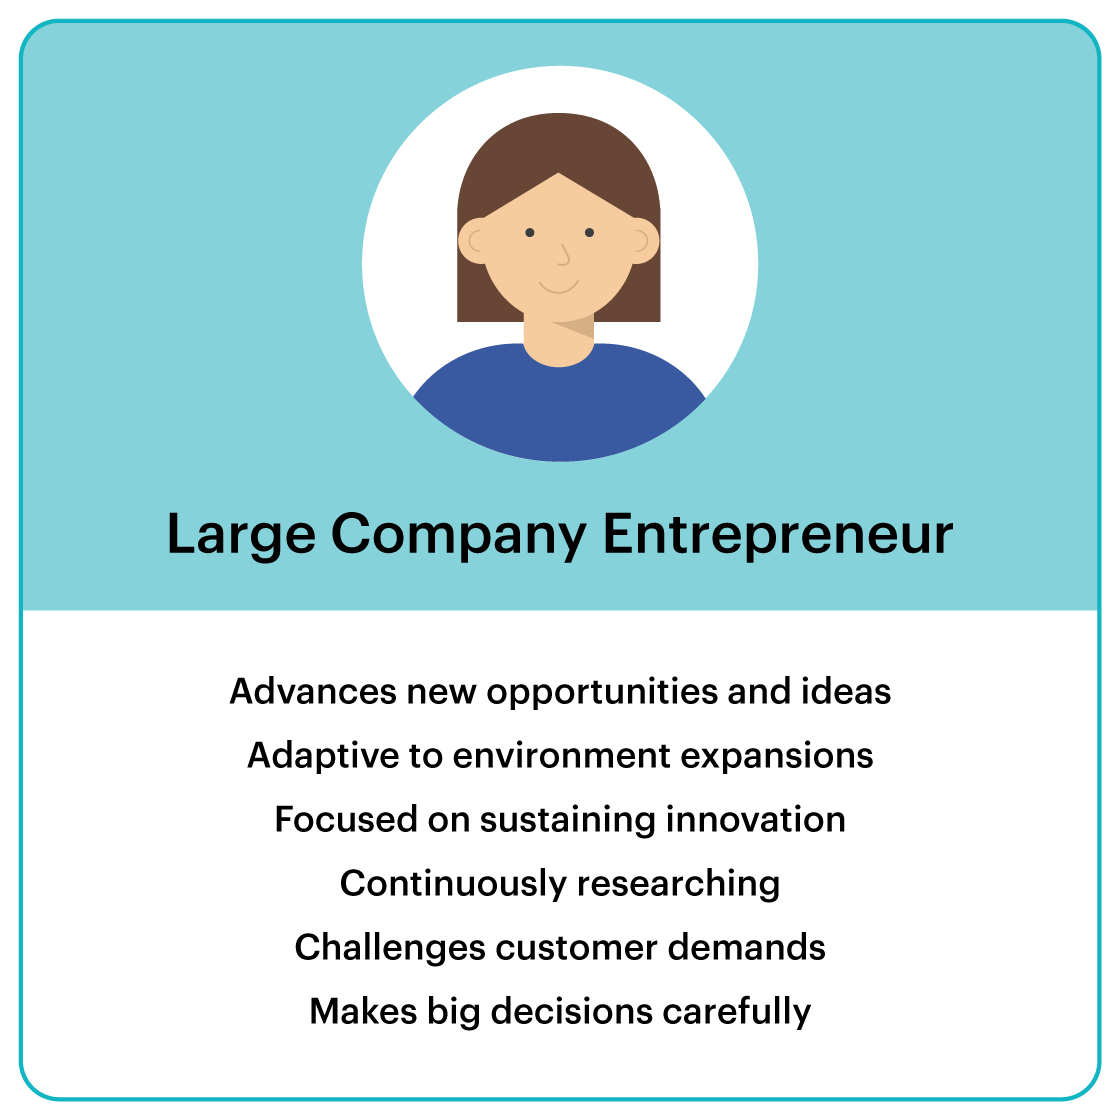 Infographic depicting an illustration of a large company entrepreneur and 6 common characteristics